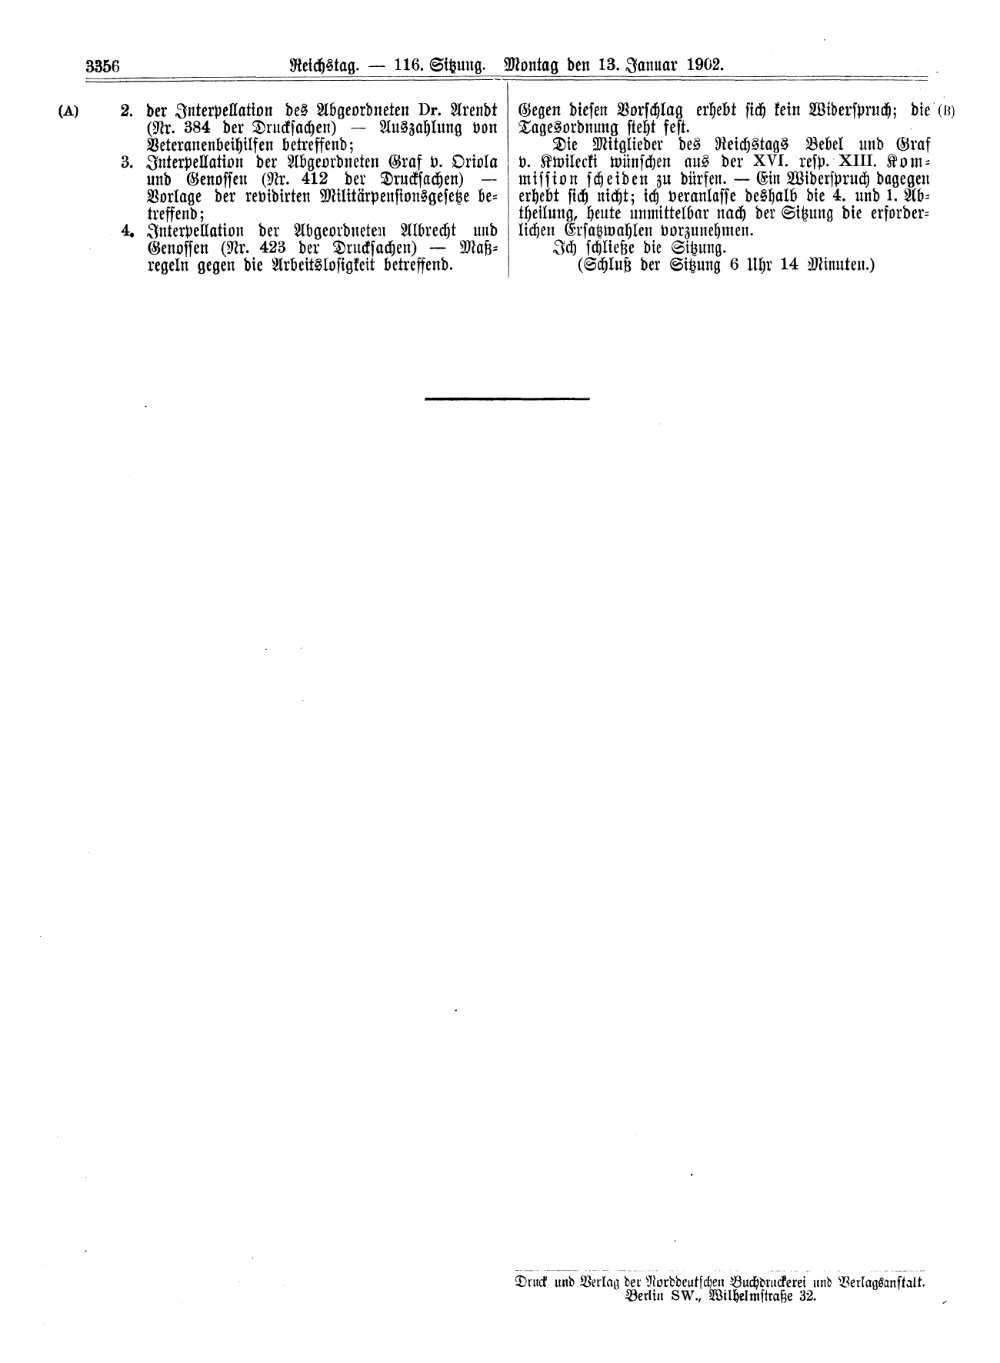 Scan of page 3356